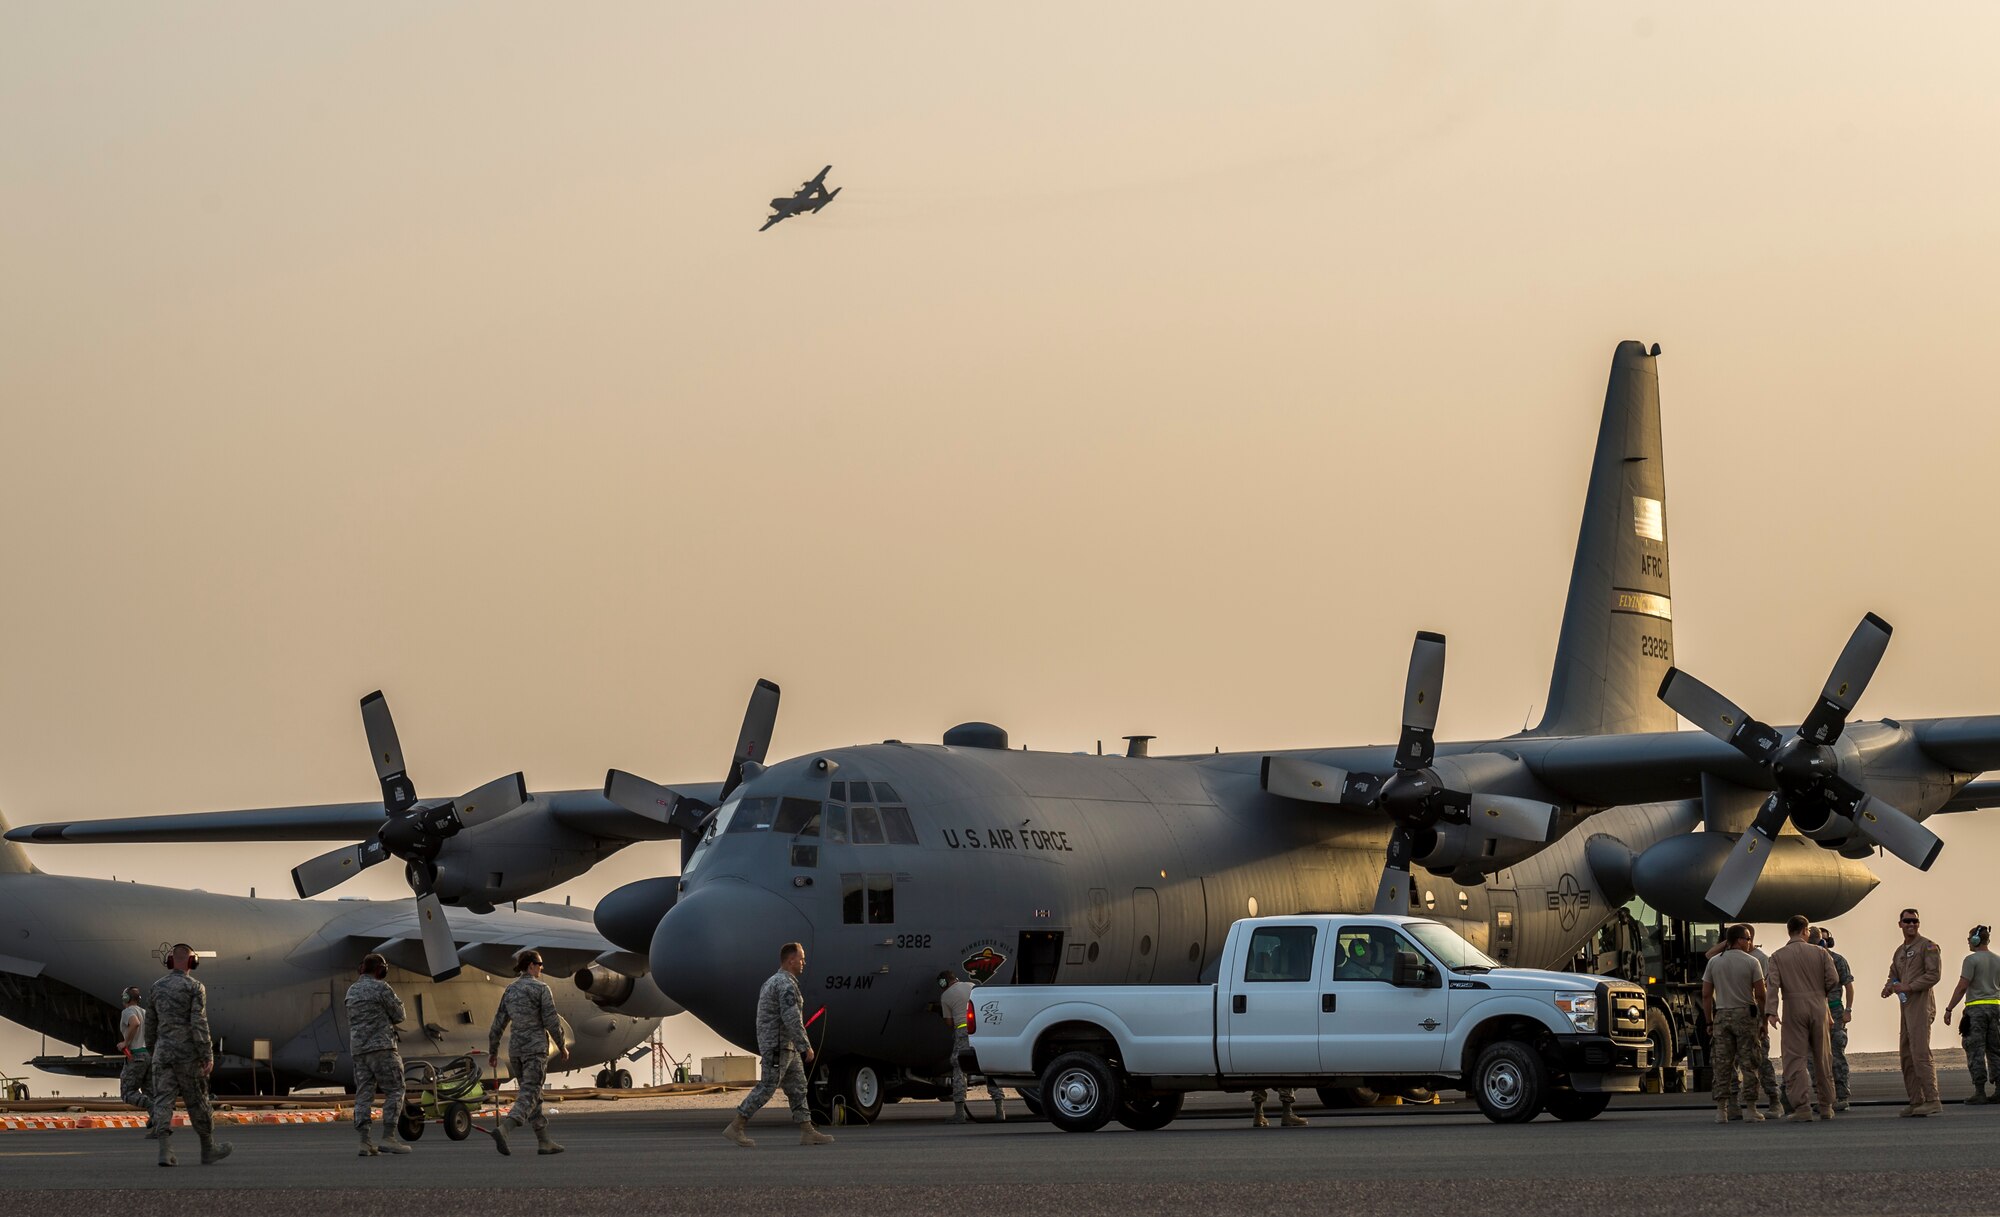 Airmen of the 934th Air Wing unload after landing at their new home Sept. 12, 2014 at an undisclosed location in Southwest Asia. The crews will be stationed with the 386th Air Expeditionary Wing for the next four months and deployed from Minneapolis-St Paul Air Reserve Station, Minn. in support of Operation Enduring Freedom. (U.S. Air Force photo by Staff Sgt. Jeremy Bowcock)